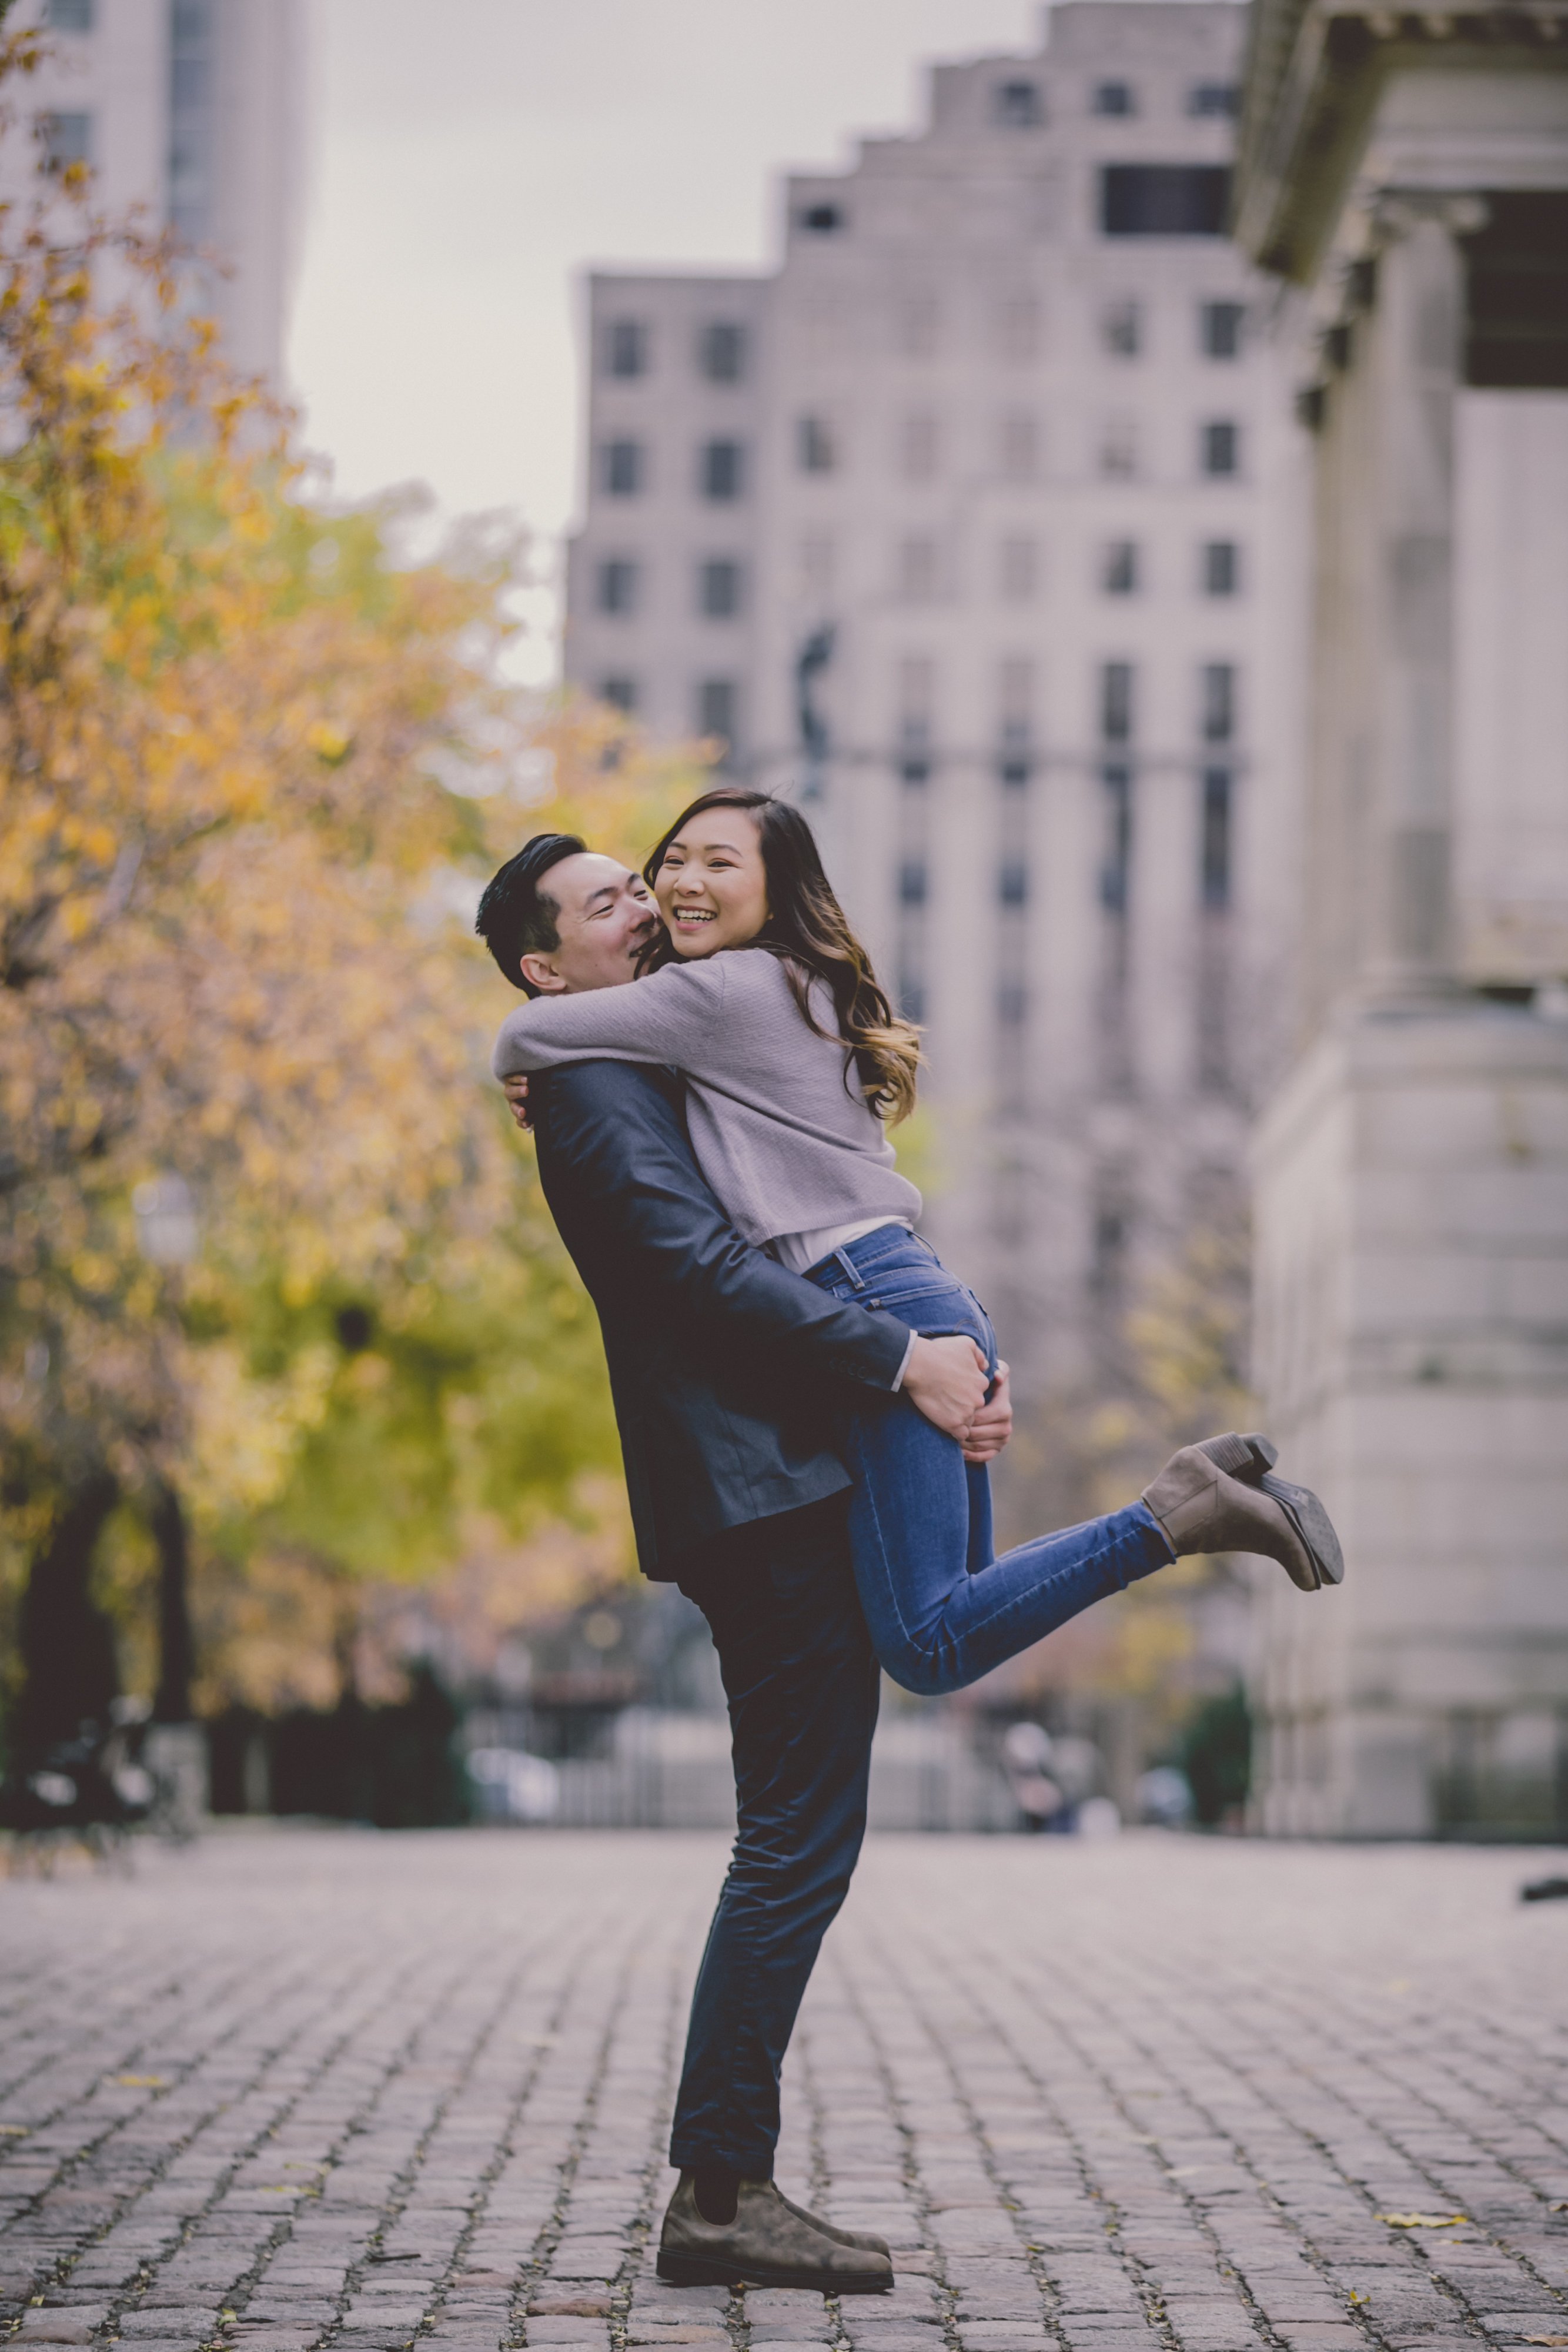 Romantic engaged couple, engaged couples Toronto, romance at Osgoode Hall, Downtown Toronto nature and architecture, autumn leaves, engagement photo session by Olive Studio Photography